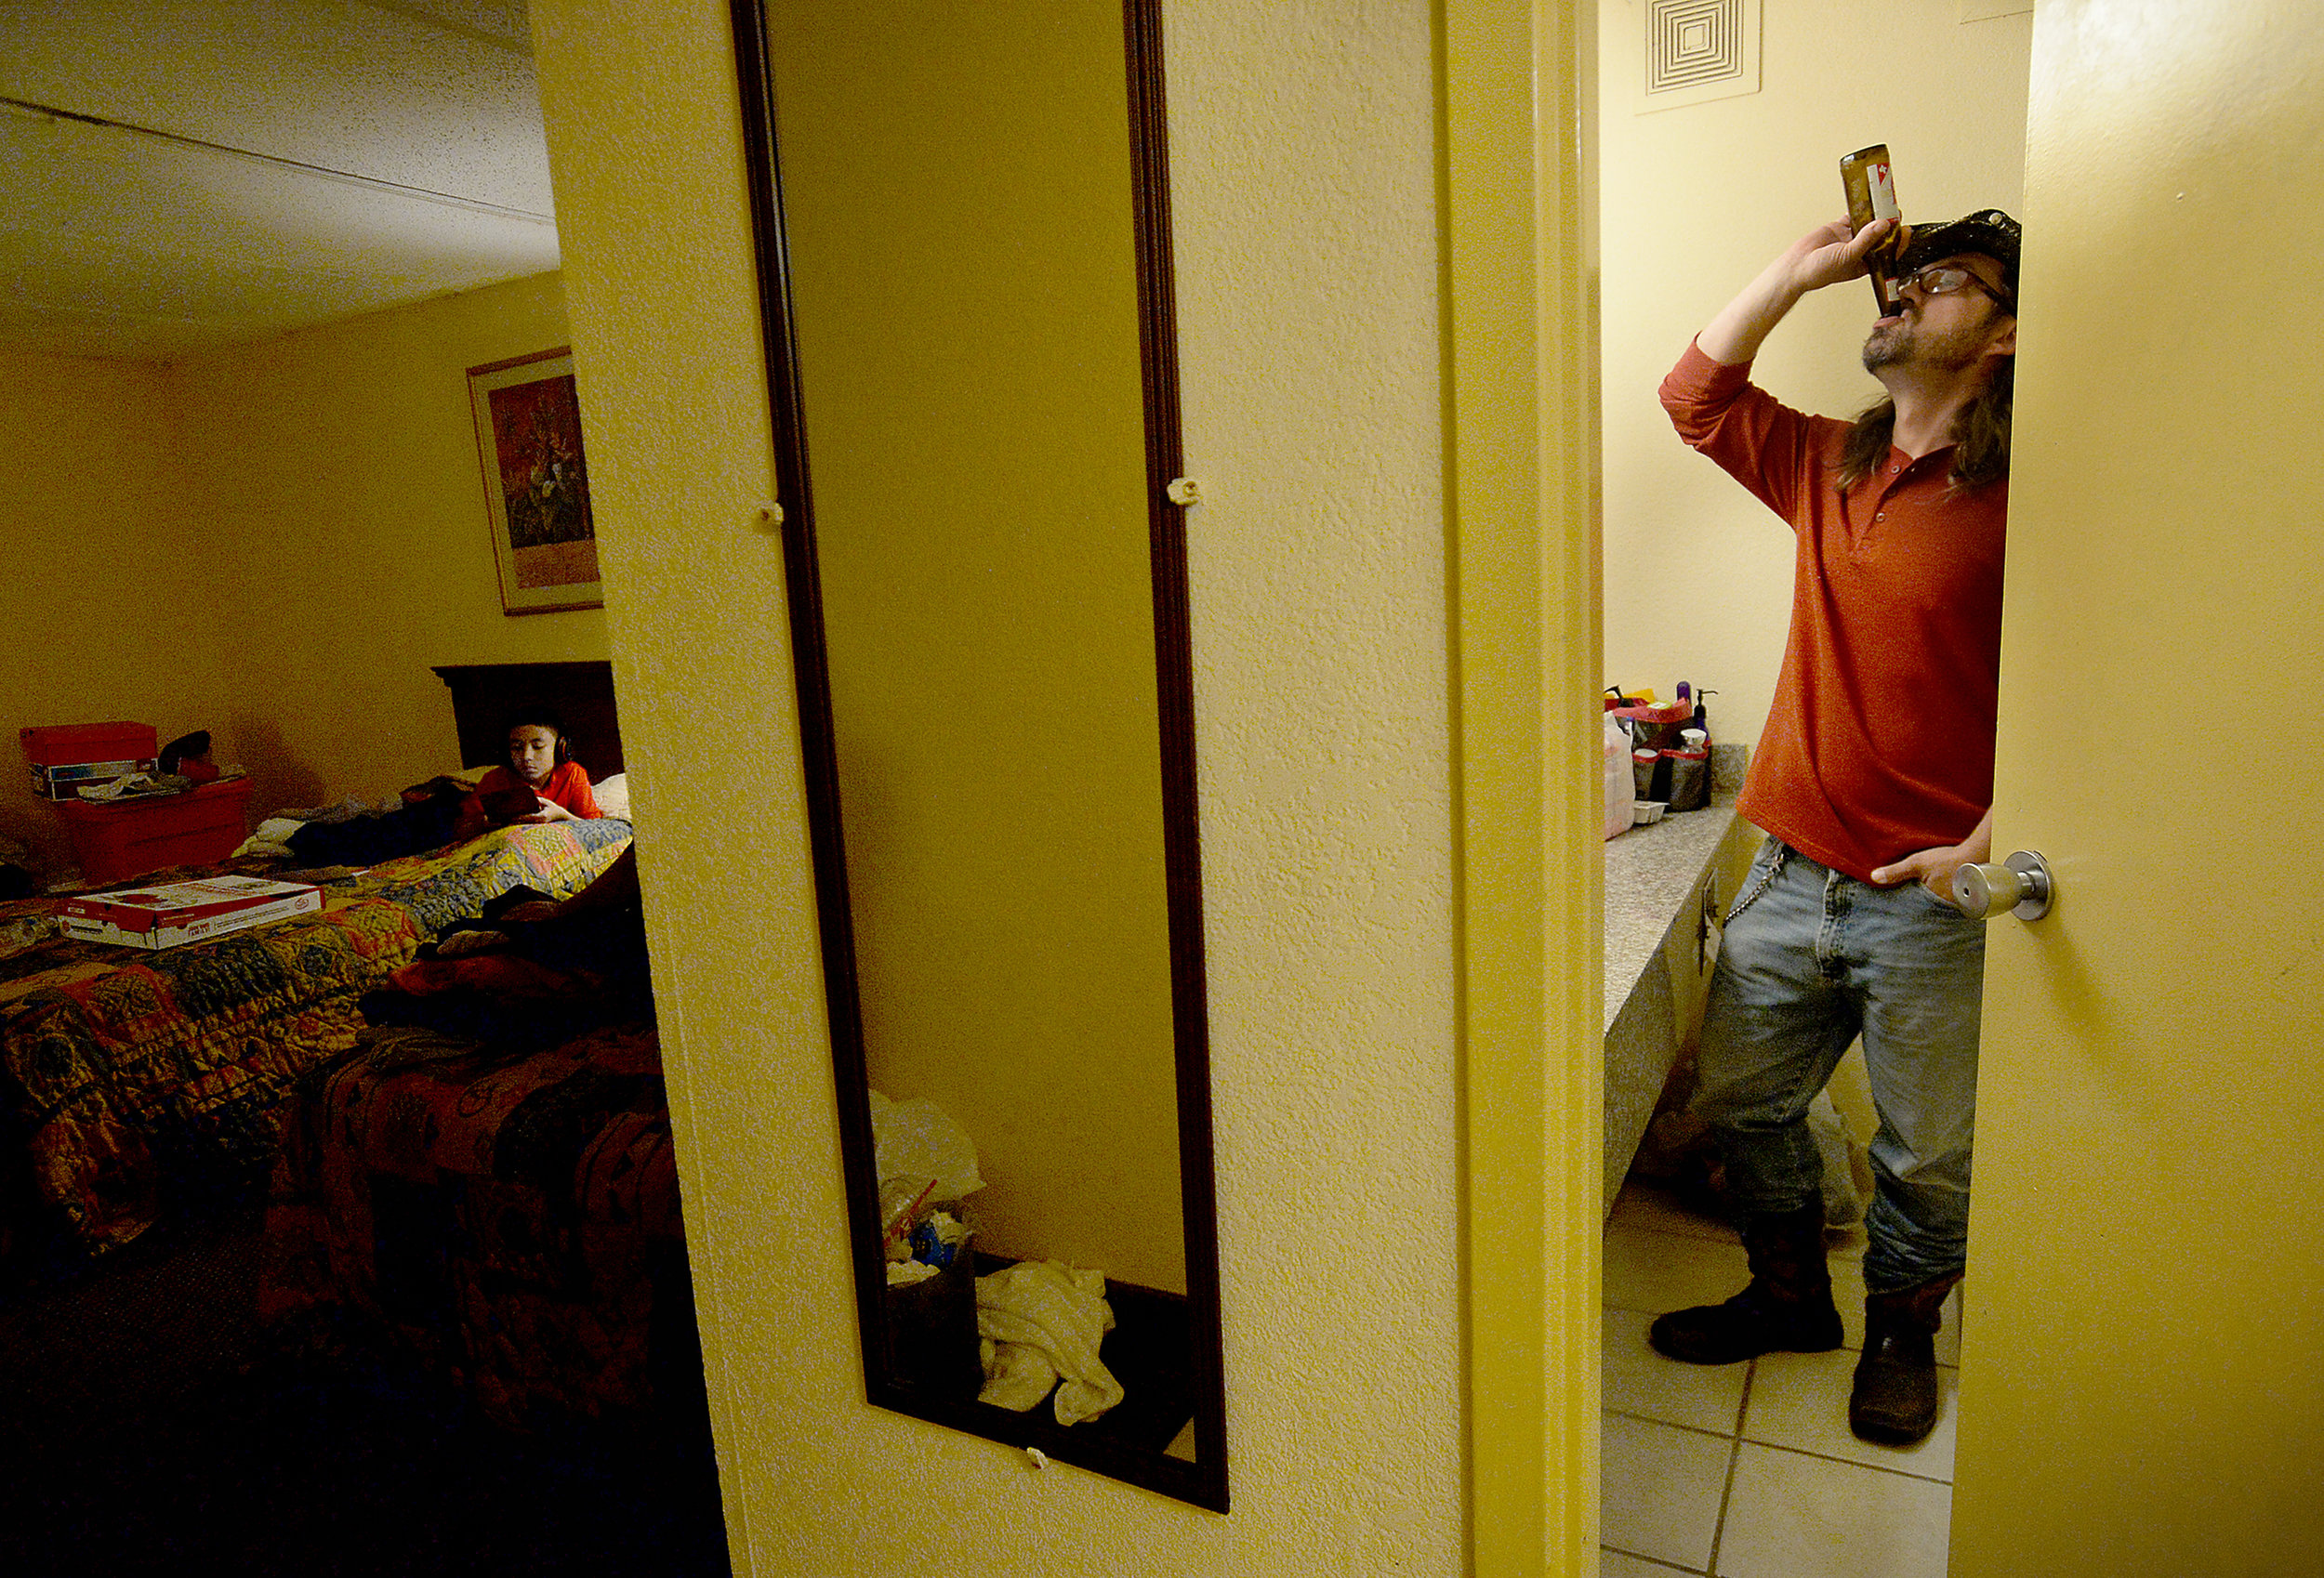  Steven Kaufman finishes a beer after stepping into the restroom to smoke at their hotel room in the Beaumont Lodge. The family have been staying there on a FEMA voucher after evacuating their flooded home 3 weeks ago.  Photo taken Wednesday, Septemb